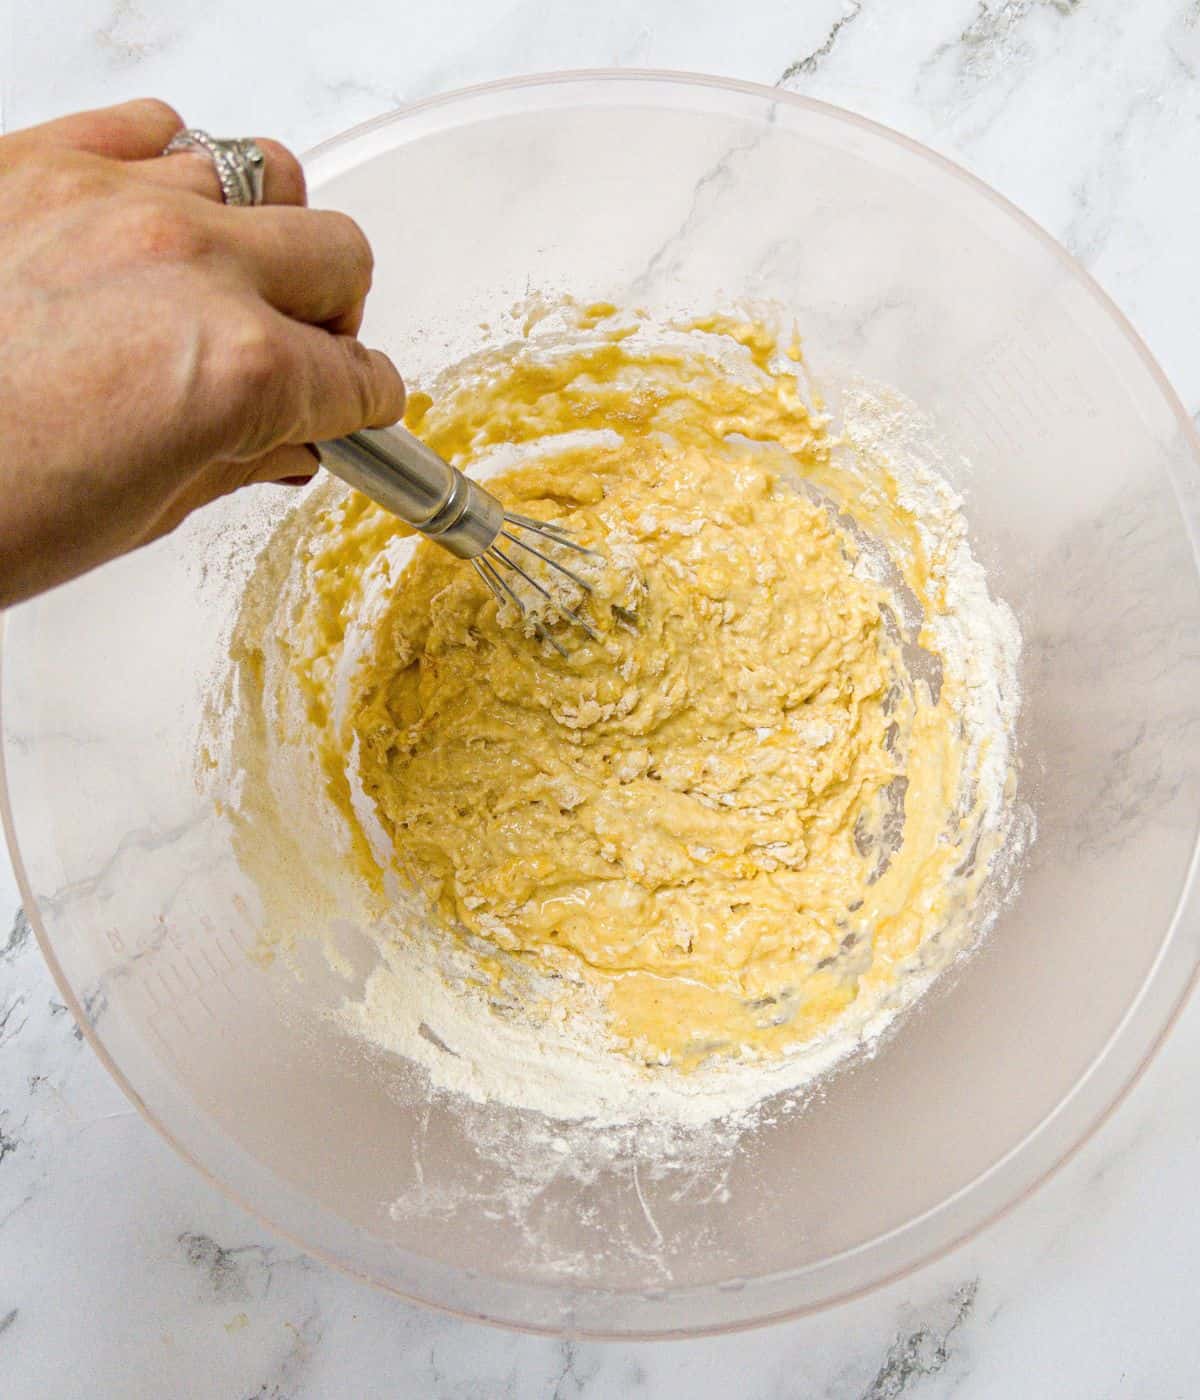 Crepe batter being whisked in a bowl.